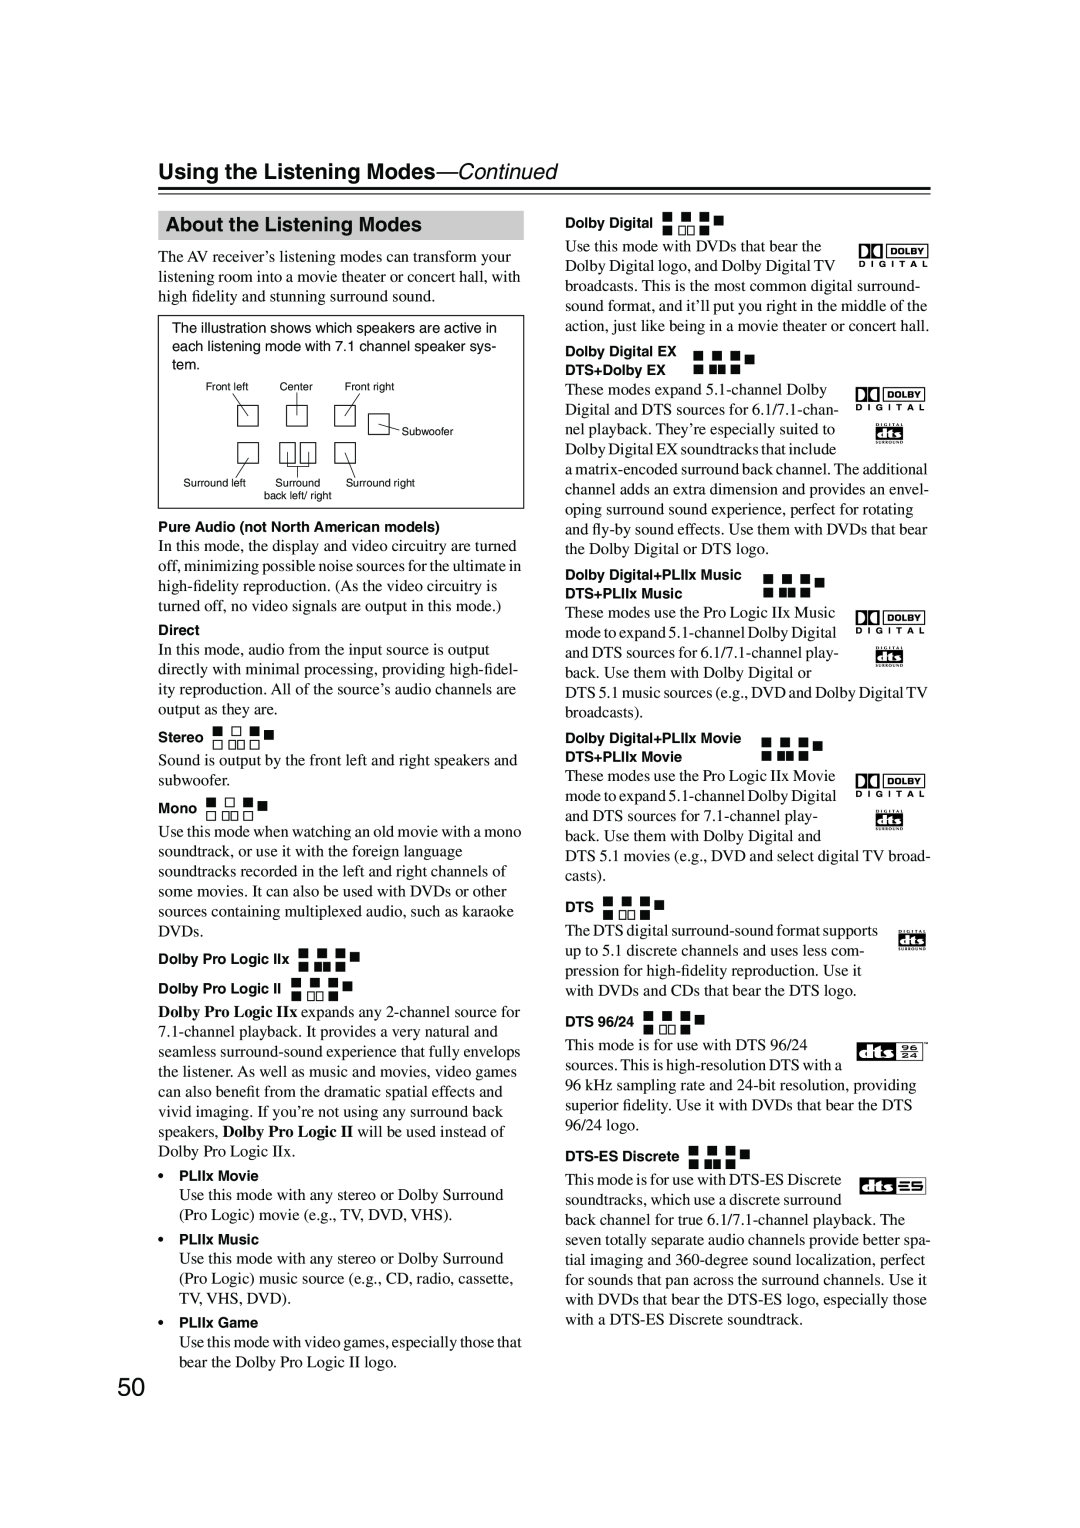 Onkyo TX-SR8550, SR575, TX-SR505E instruction manual About the Listening Modes, Using the Listening Modes-Continued 